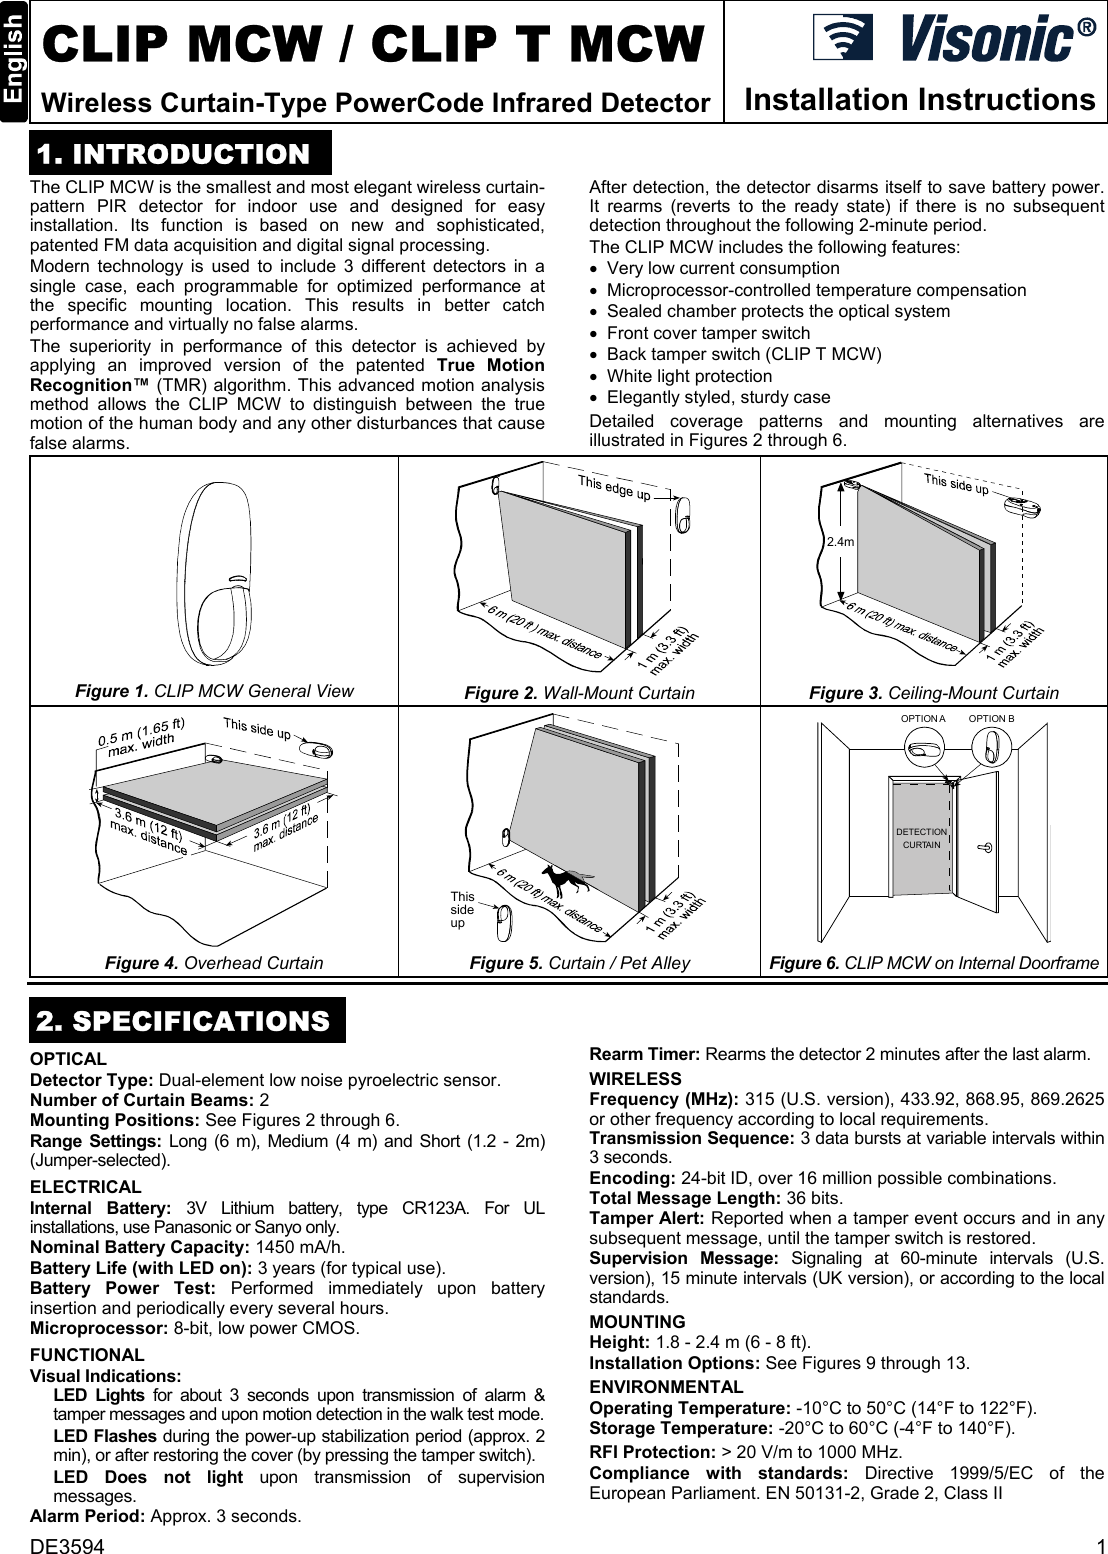 DE3594  1  CLIP MCW / CLIP T MCW Wireless Curtain-Type PowerCode Infrared Detector  Installation Instructions 1. INTRODUCTION The CLIP MCW is the smallest and most elegant wireless curtain-pattern PIR detector for indoor use and designed for easy installation. Its function is based on new and sophisticated, patented FM data acquisition and digital signal processing.  Modern technology is used to include 3 different detectors in a single case, each programmable for optimized performance at the specific mounting location. This results in better catch performance and virtually no false alarms. The superiority in performance of this detector is achieved by applying an improved version of the patented True Motion Recognition™ (TMR) algorithm. This advanced motion analysis method allows the CLIP MCW to distinguish between the true motion of the human body and any other disturbances that cause false alarms.  After detection, the detector disarms itself to save battery power. It rearms (reverts to the ready state) if there is no subsequent detection throughout the following 2-minute period. The CLIP MCW includes the following features: •  Very low current consumption •  Microprocessor-controlled temperature compensation •  Sealed chamber protects the optical system •  Front cover tamper switch •  Back tamper switch (CLIP T MCW) •  White light protection •  Elegantly styled, sturdy case Detailed coverage patterns and mounting alternatives are illustrated in Figures 2 through 6.  Figure 1. CLIP MCW General View   Figure 2. Wall-Mount Curtain 2.4m Figure 3. Ceiling-Mount Curtain  Figure 4. Overhead Curtain Thissideup  Figure 5. Curtain / Pet Alley OPTION A OPTION BDETECTIONCURTAIN Figure 6. CLIP MCW on Internal Doorframe 2. SPECIFICATIONS OPTICAL Detector Type: Dual-element low noise pyroelectric sensor. Number of Curtain Beams: 2 Mounting Positions: See Figures 2 through 6. Range Settings: Long (6 m), Medium (4 m) and Short (1.2 - 2m) (Jumper-selected).  ELECTRICAL Internal Battery: 3V Lithium battery, type CR123A. For UL installations, use Panasonic or Sanyo only. Nominal Battery Capacity: 1450 mA/h. Battery Life (with LED on): 3 years (for typical use). Battery Power Test: Performed immediately upon battery insertion and periodically every several hours. Microprocessor: 8-bit, low power CMOS. FUNCTIONAL Visual Indications:  LED Lights for about 3 seconds upon transmission of alarm &amp; tamper messages and upon motion detection in the walk test mode.  LED Flashes during the power-up stabilization period (approx. 2 min), or after restoring the cover (by pressing the tamper switch). LED Does not light upon transmission of supervision messages. Alarm Period: Approx. 3 seconds. Rearm Timer: Rearms the detector 2 minutes after the last alarm.  WIRELESS Frequency (MHz): 315 (U.S. version), 433.92, 868.95, 869.2625 or other frequency according to local requirements. Transmission Sequence: 3 data bursts at variable intervals within 3 seconds. Encoding: 24-bit ID, over 16 million possible combinations. Total Message Length: 36 bits. Tamper Alert: Reported when a tamper event occurs and in any subsequent message, until the tamper switch is restored. Supervision Message: Signaling at 60-minute intervals (U.S. version), 15 minute intervals (UK version), or according to the local standards. MOUNTING  Height: 1.8 - 2.4 m (6 - 8 ft). Installation Options: See Figures 9 through 13. ENVIRONMENTAL  Operating Temperature: -10°C to 50°C (14°F to 122°F).  Storage Temperature: -20°C to 60°C (-4°F to 140°F).  RFI Protection: &gt; 20 V/m to 1000 MHz.  Compliance with standards: Directive 1999/5/EC of the European Parliament. EN 50131-2, Grade 2, Class II 